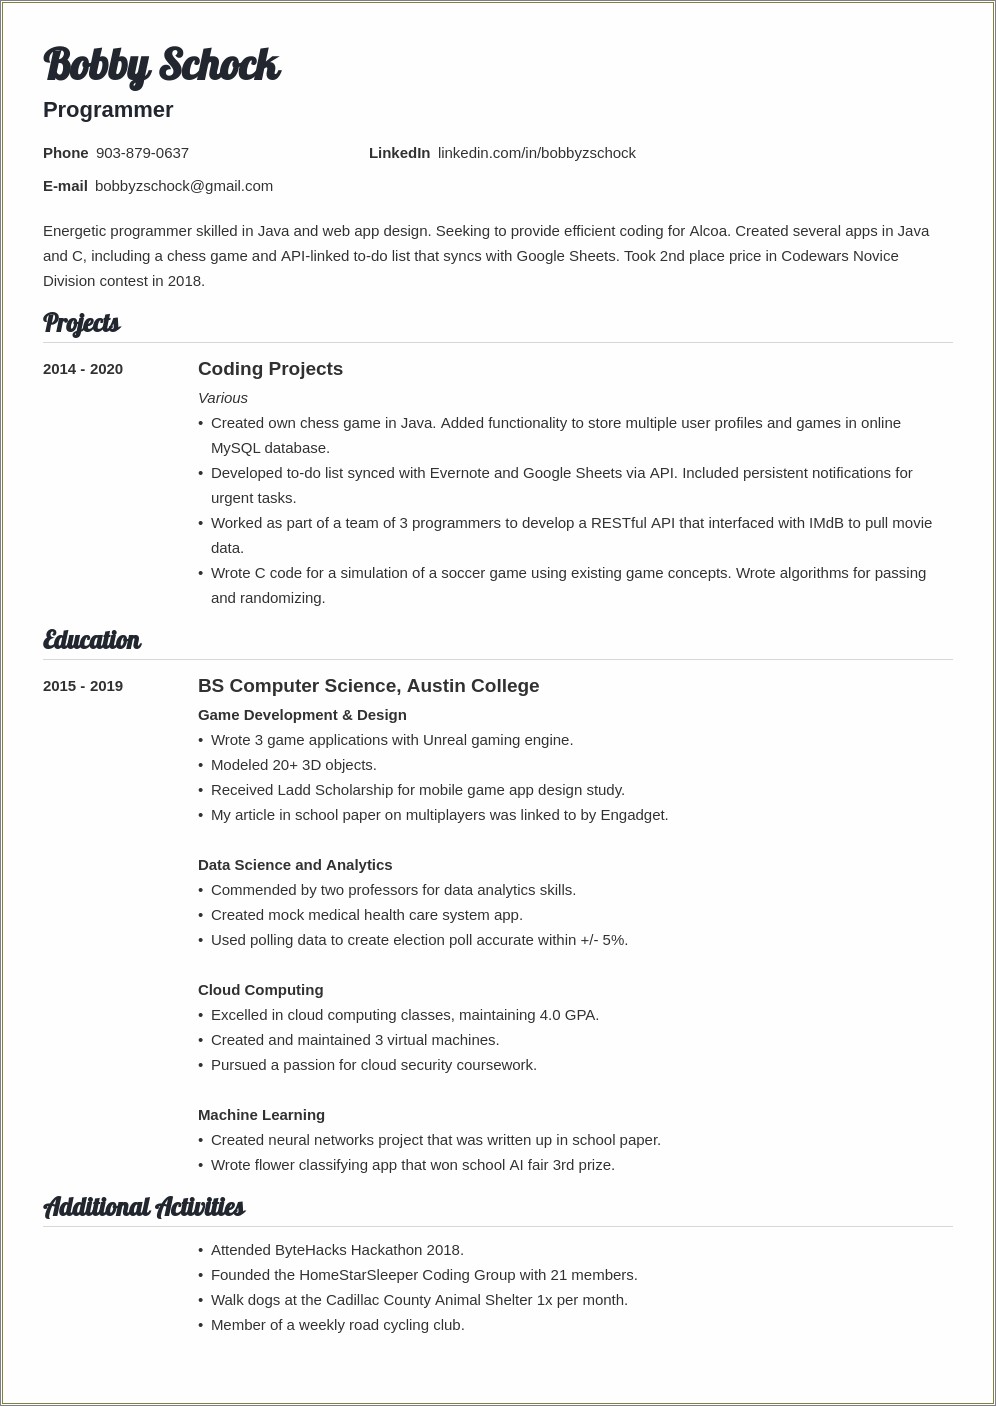 High School Resume Without Job Experience